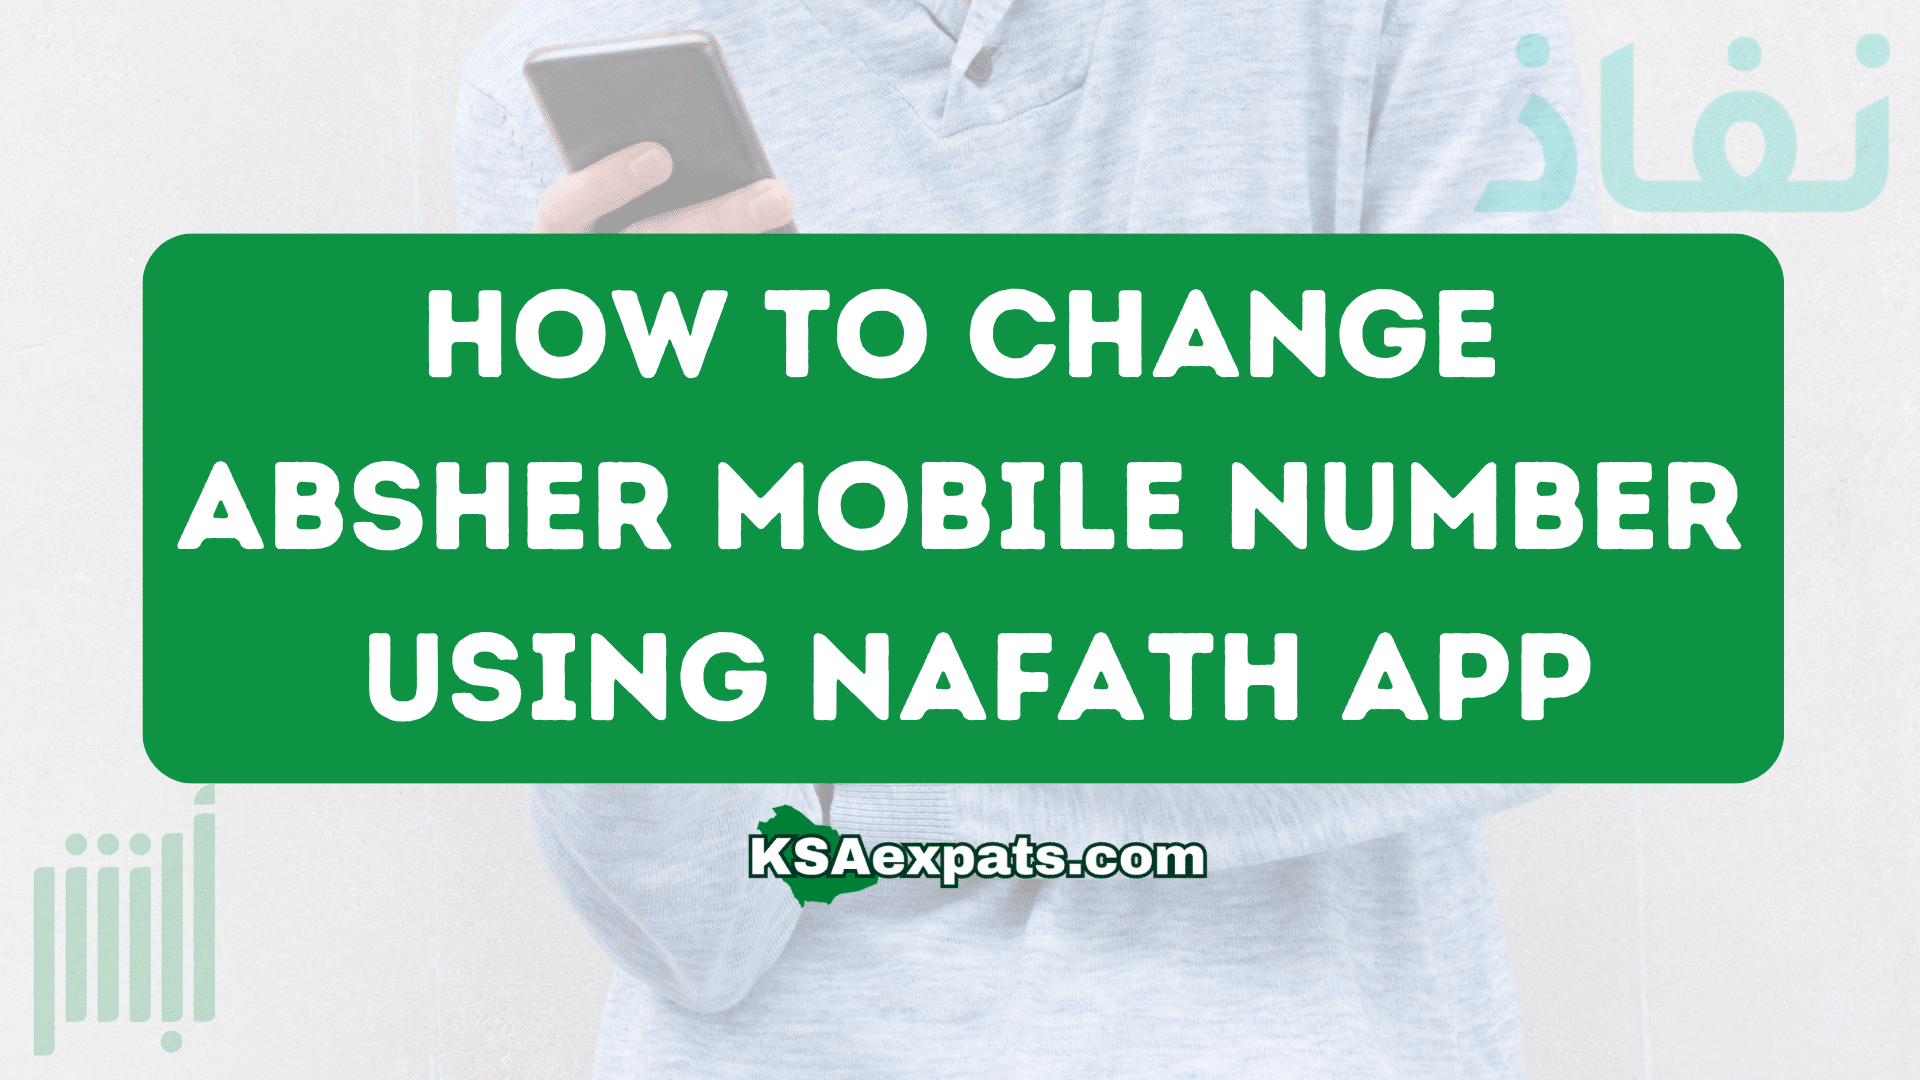 How to Change Absher Mobile Number Using Nafath App